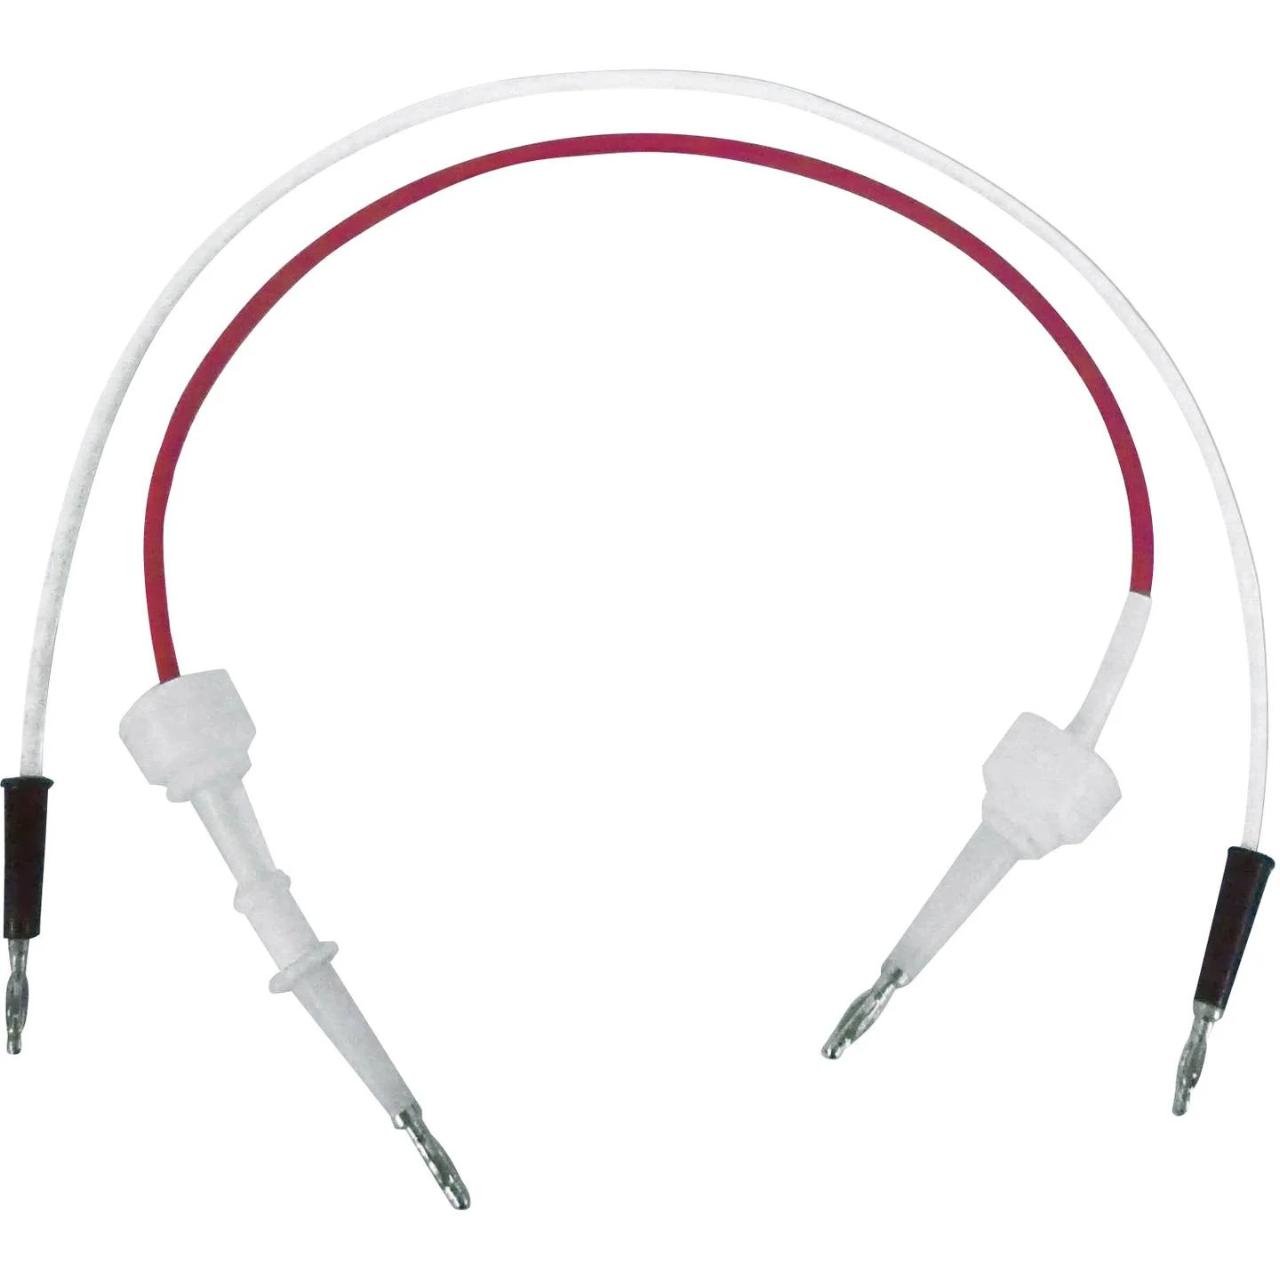 Cable set for 9800 series